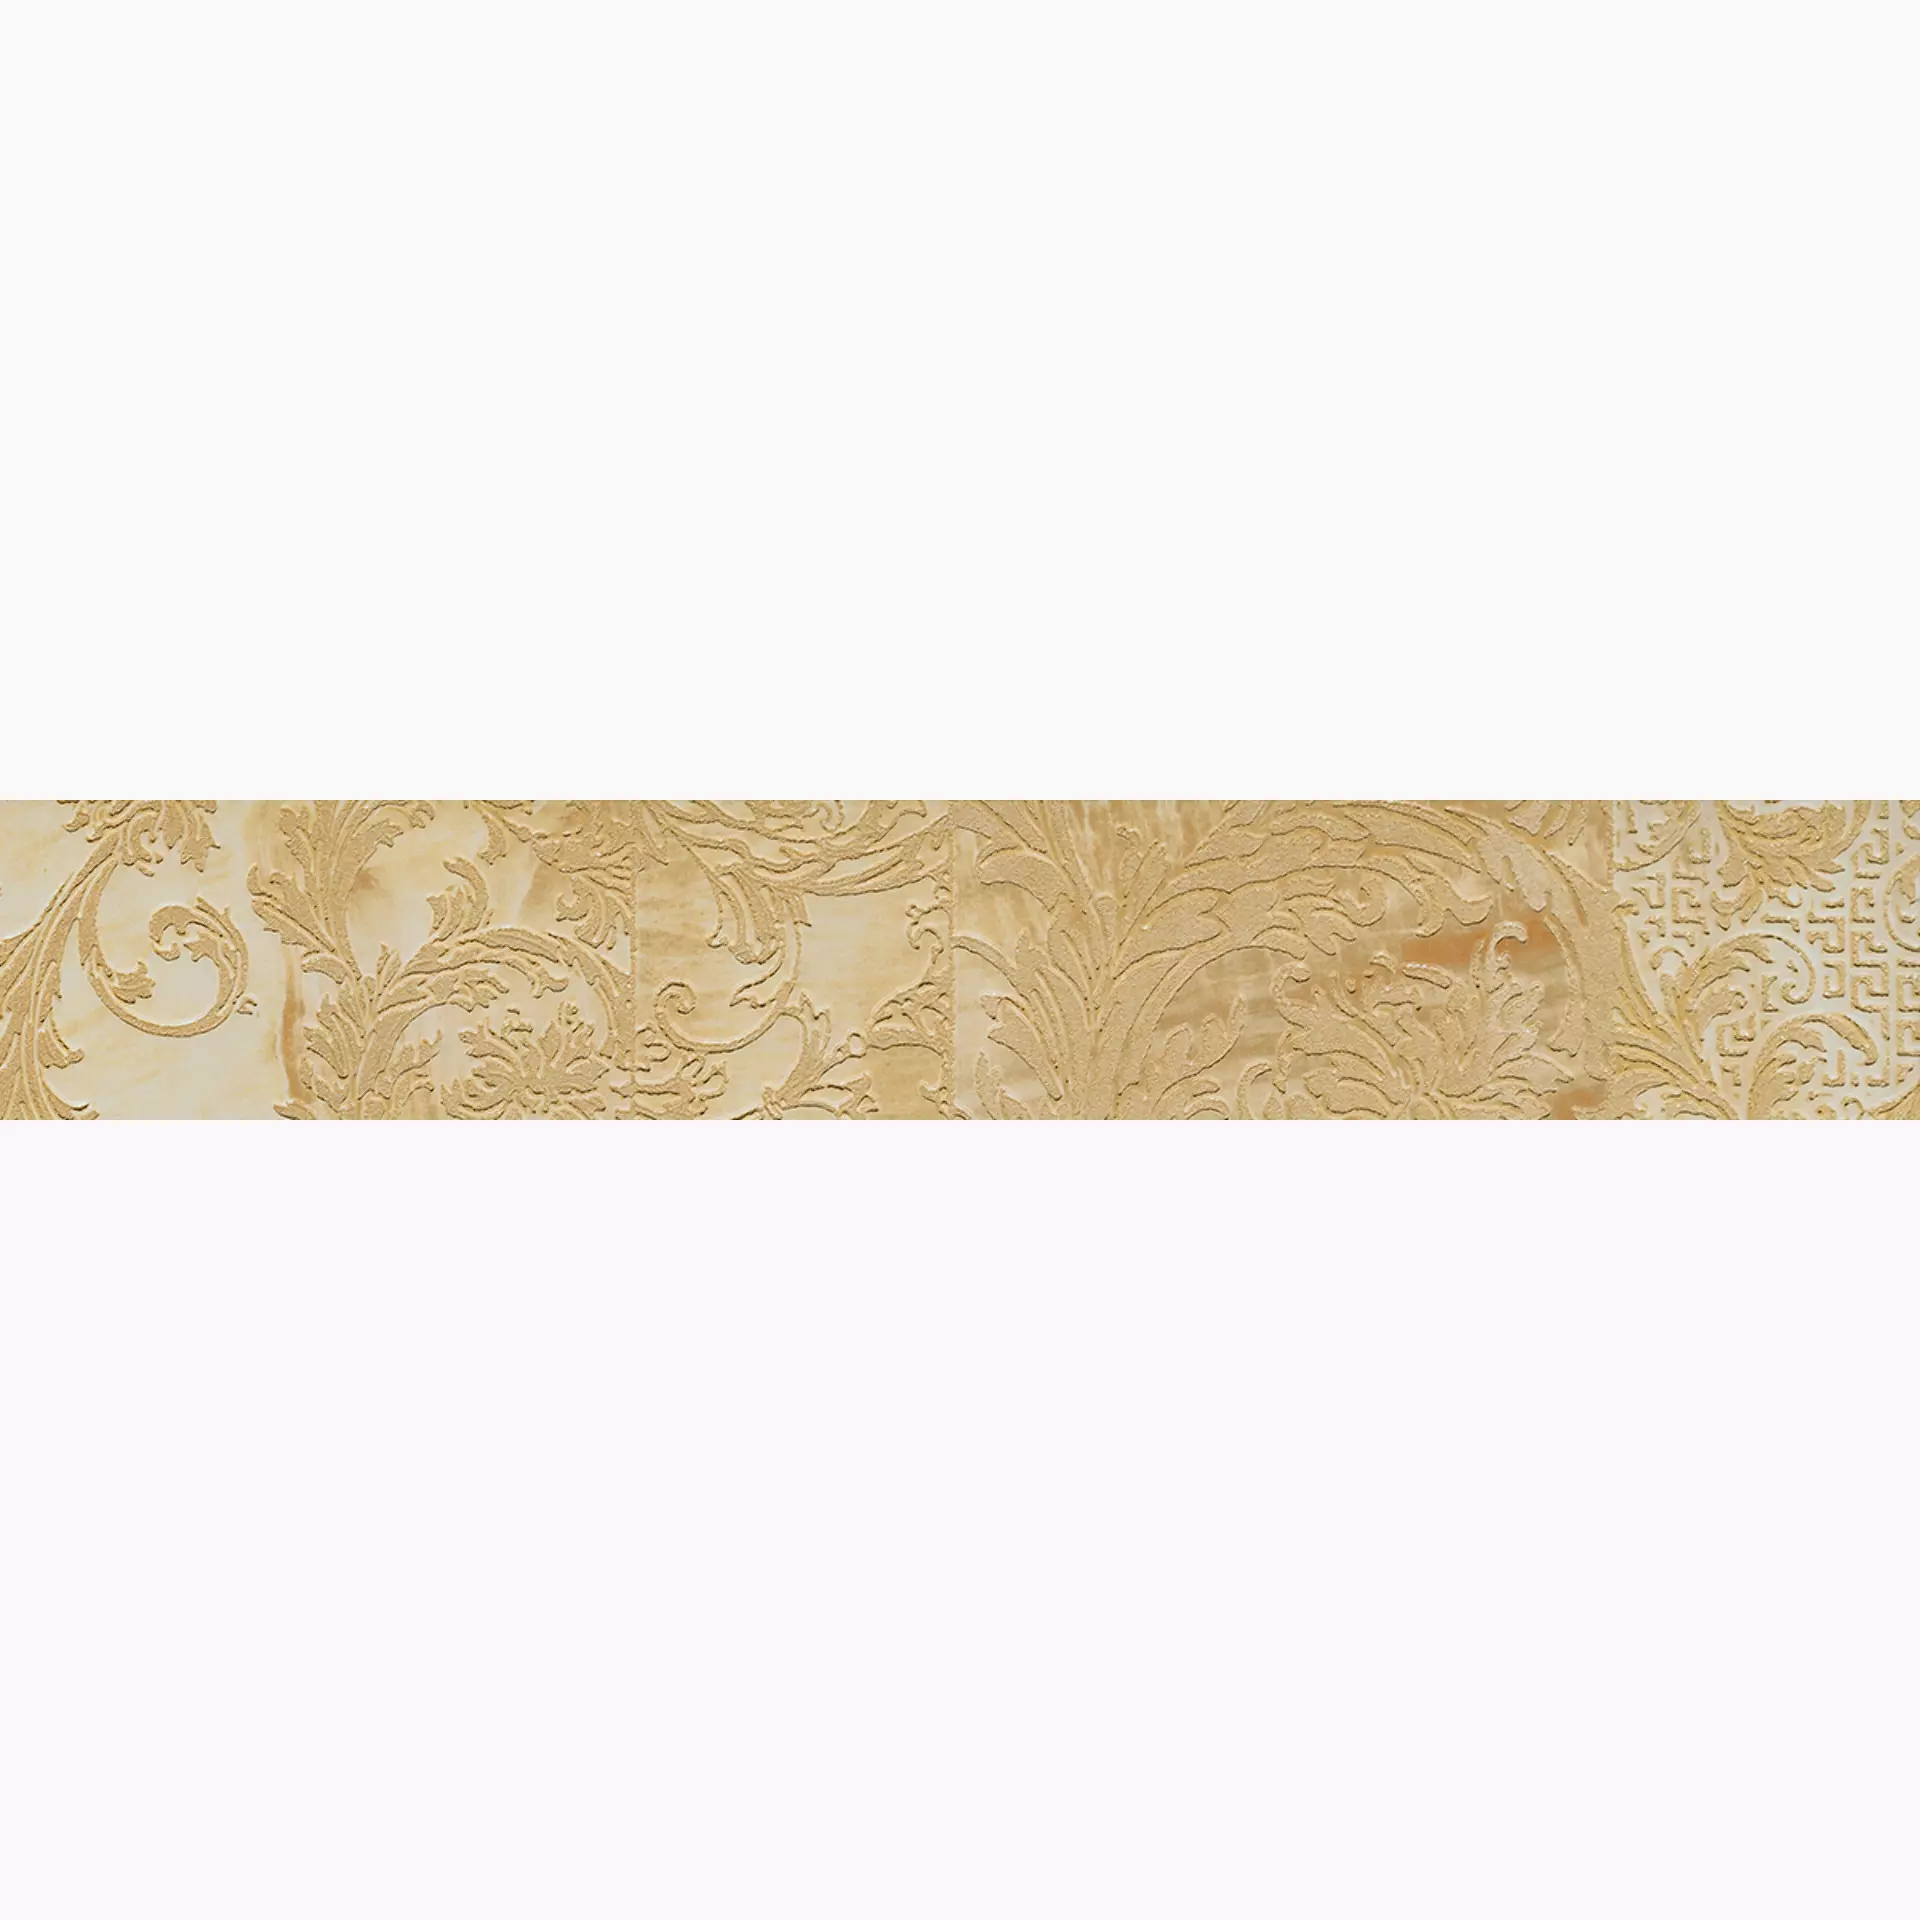 Versace Marble (Gar) Oro Lux Band Patchwork G0240732 9,8x58,5cm rectified 9,5mm